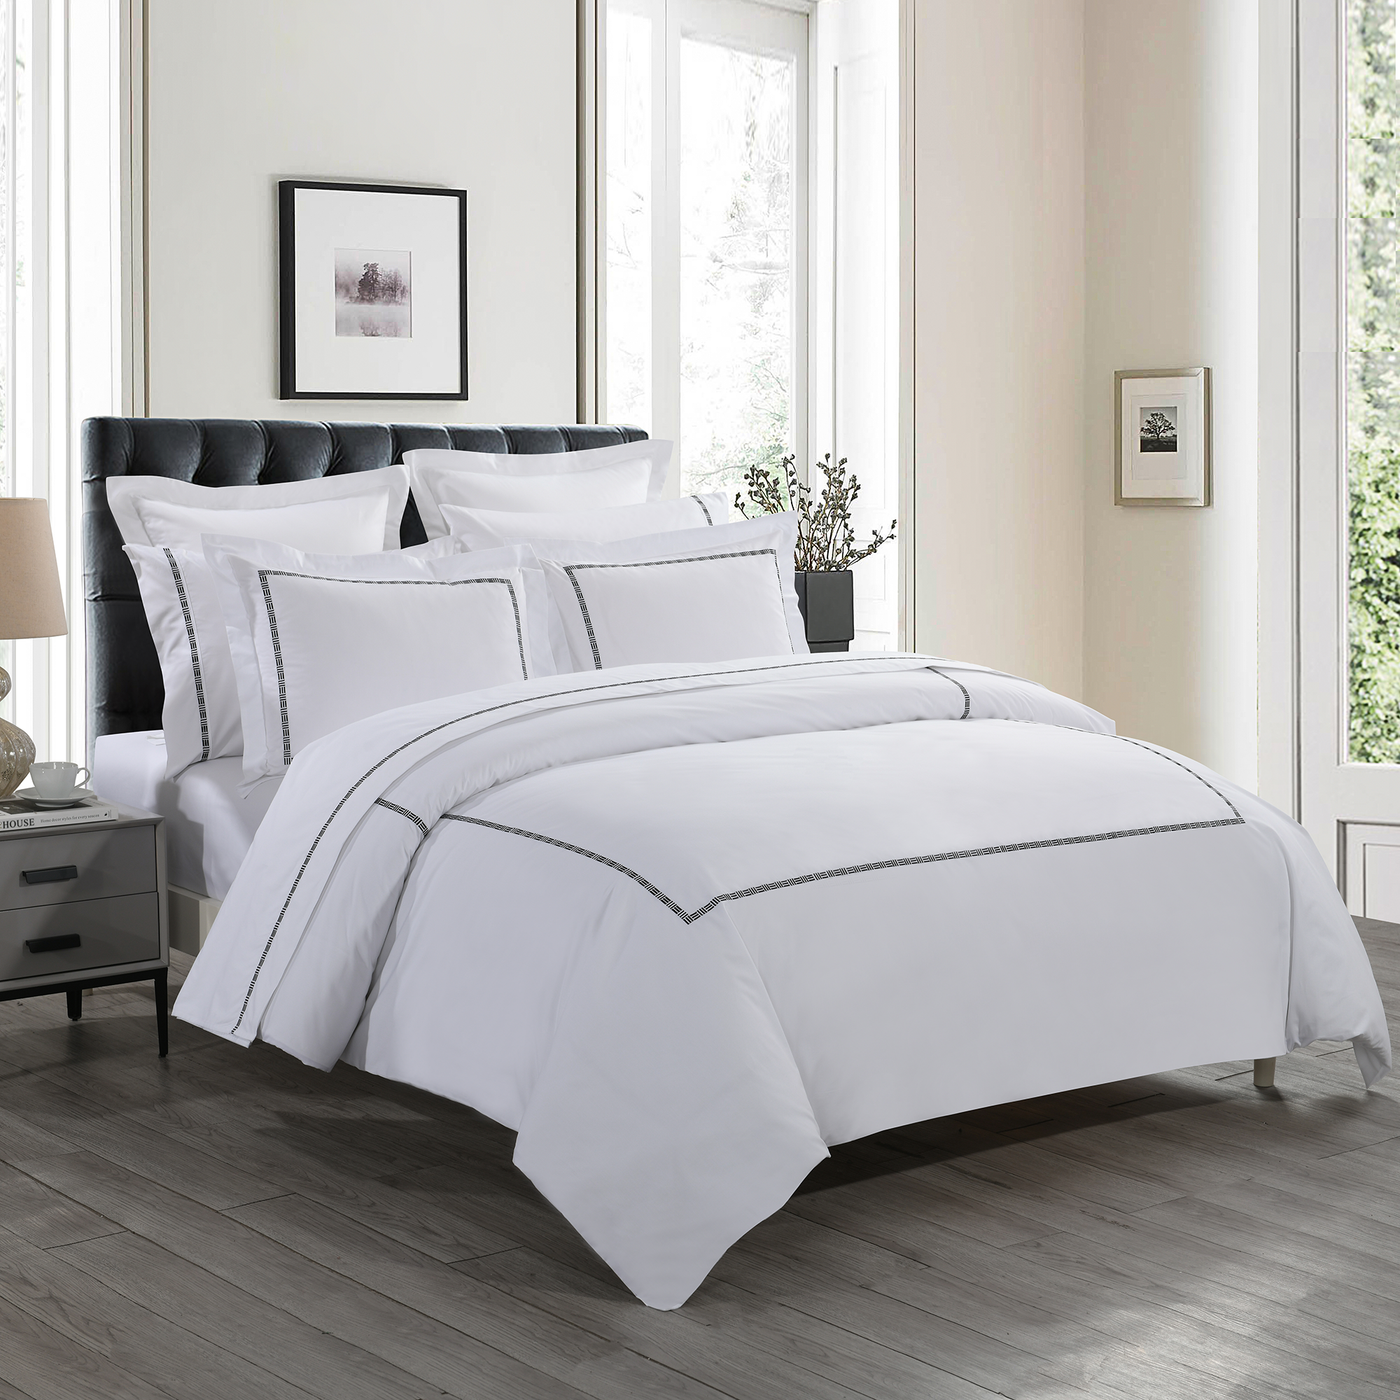 Cotton King size Quilt Bedding Set, For Home, Size: 108/108